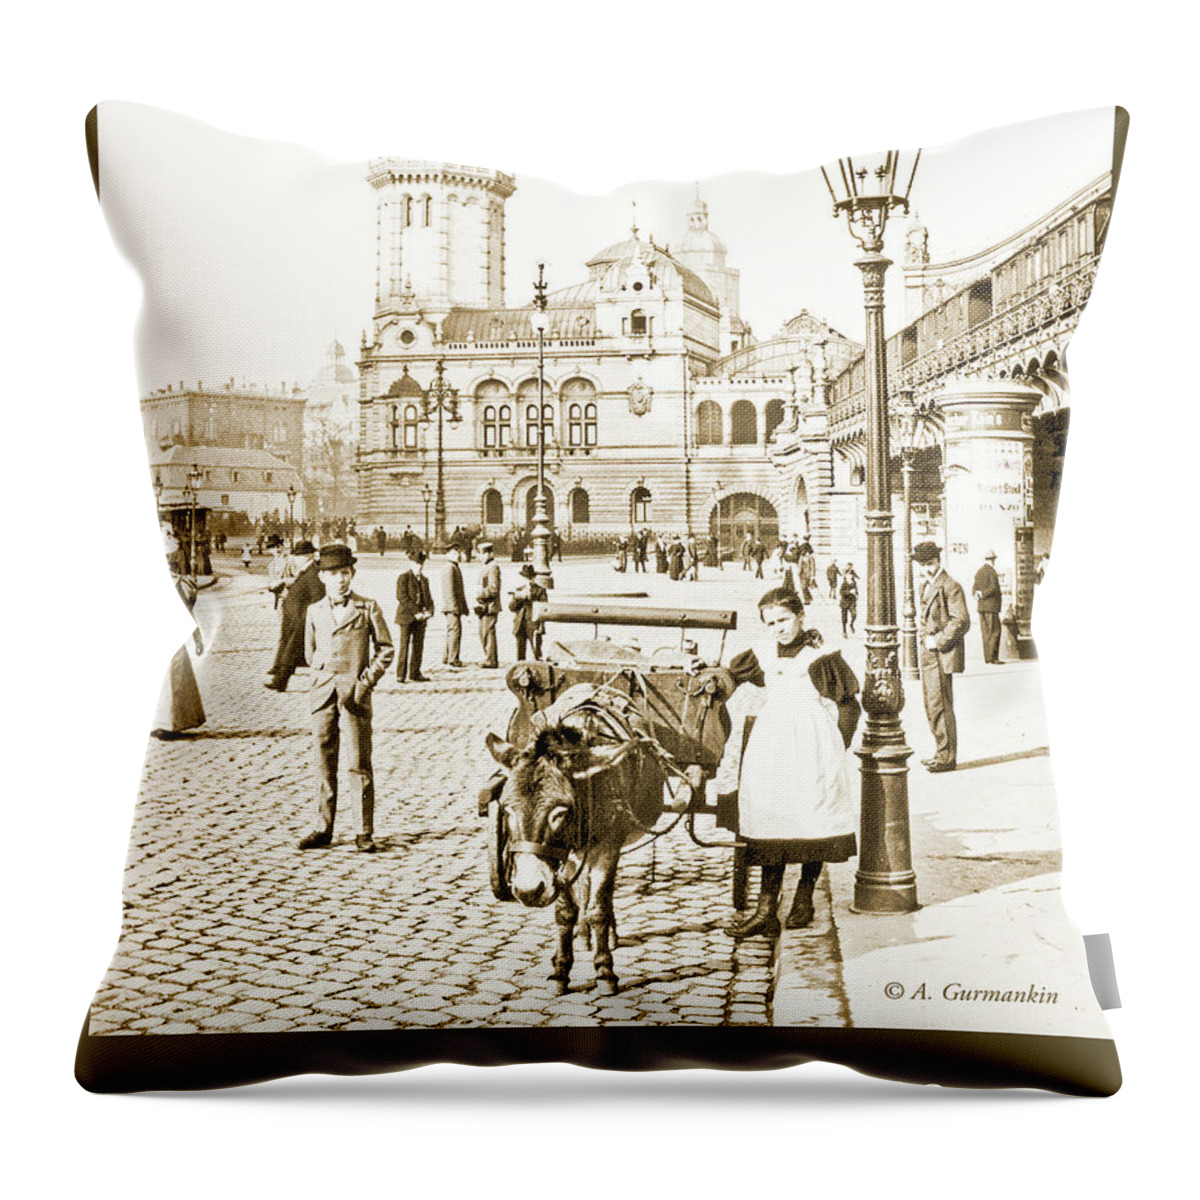 Cologne Throw Pillow featuring the photograph Cologne, Germany Street Scene, 1903, Vintage Photograph by A Macarthur Gurmankin